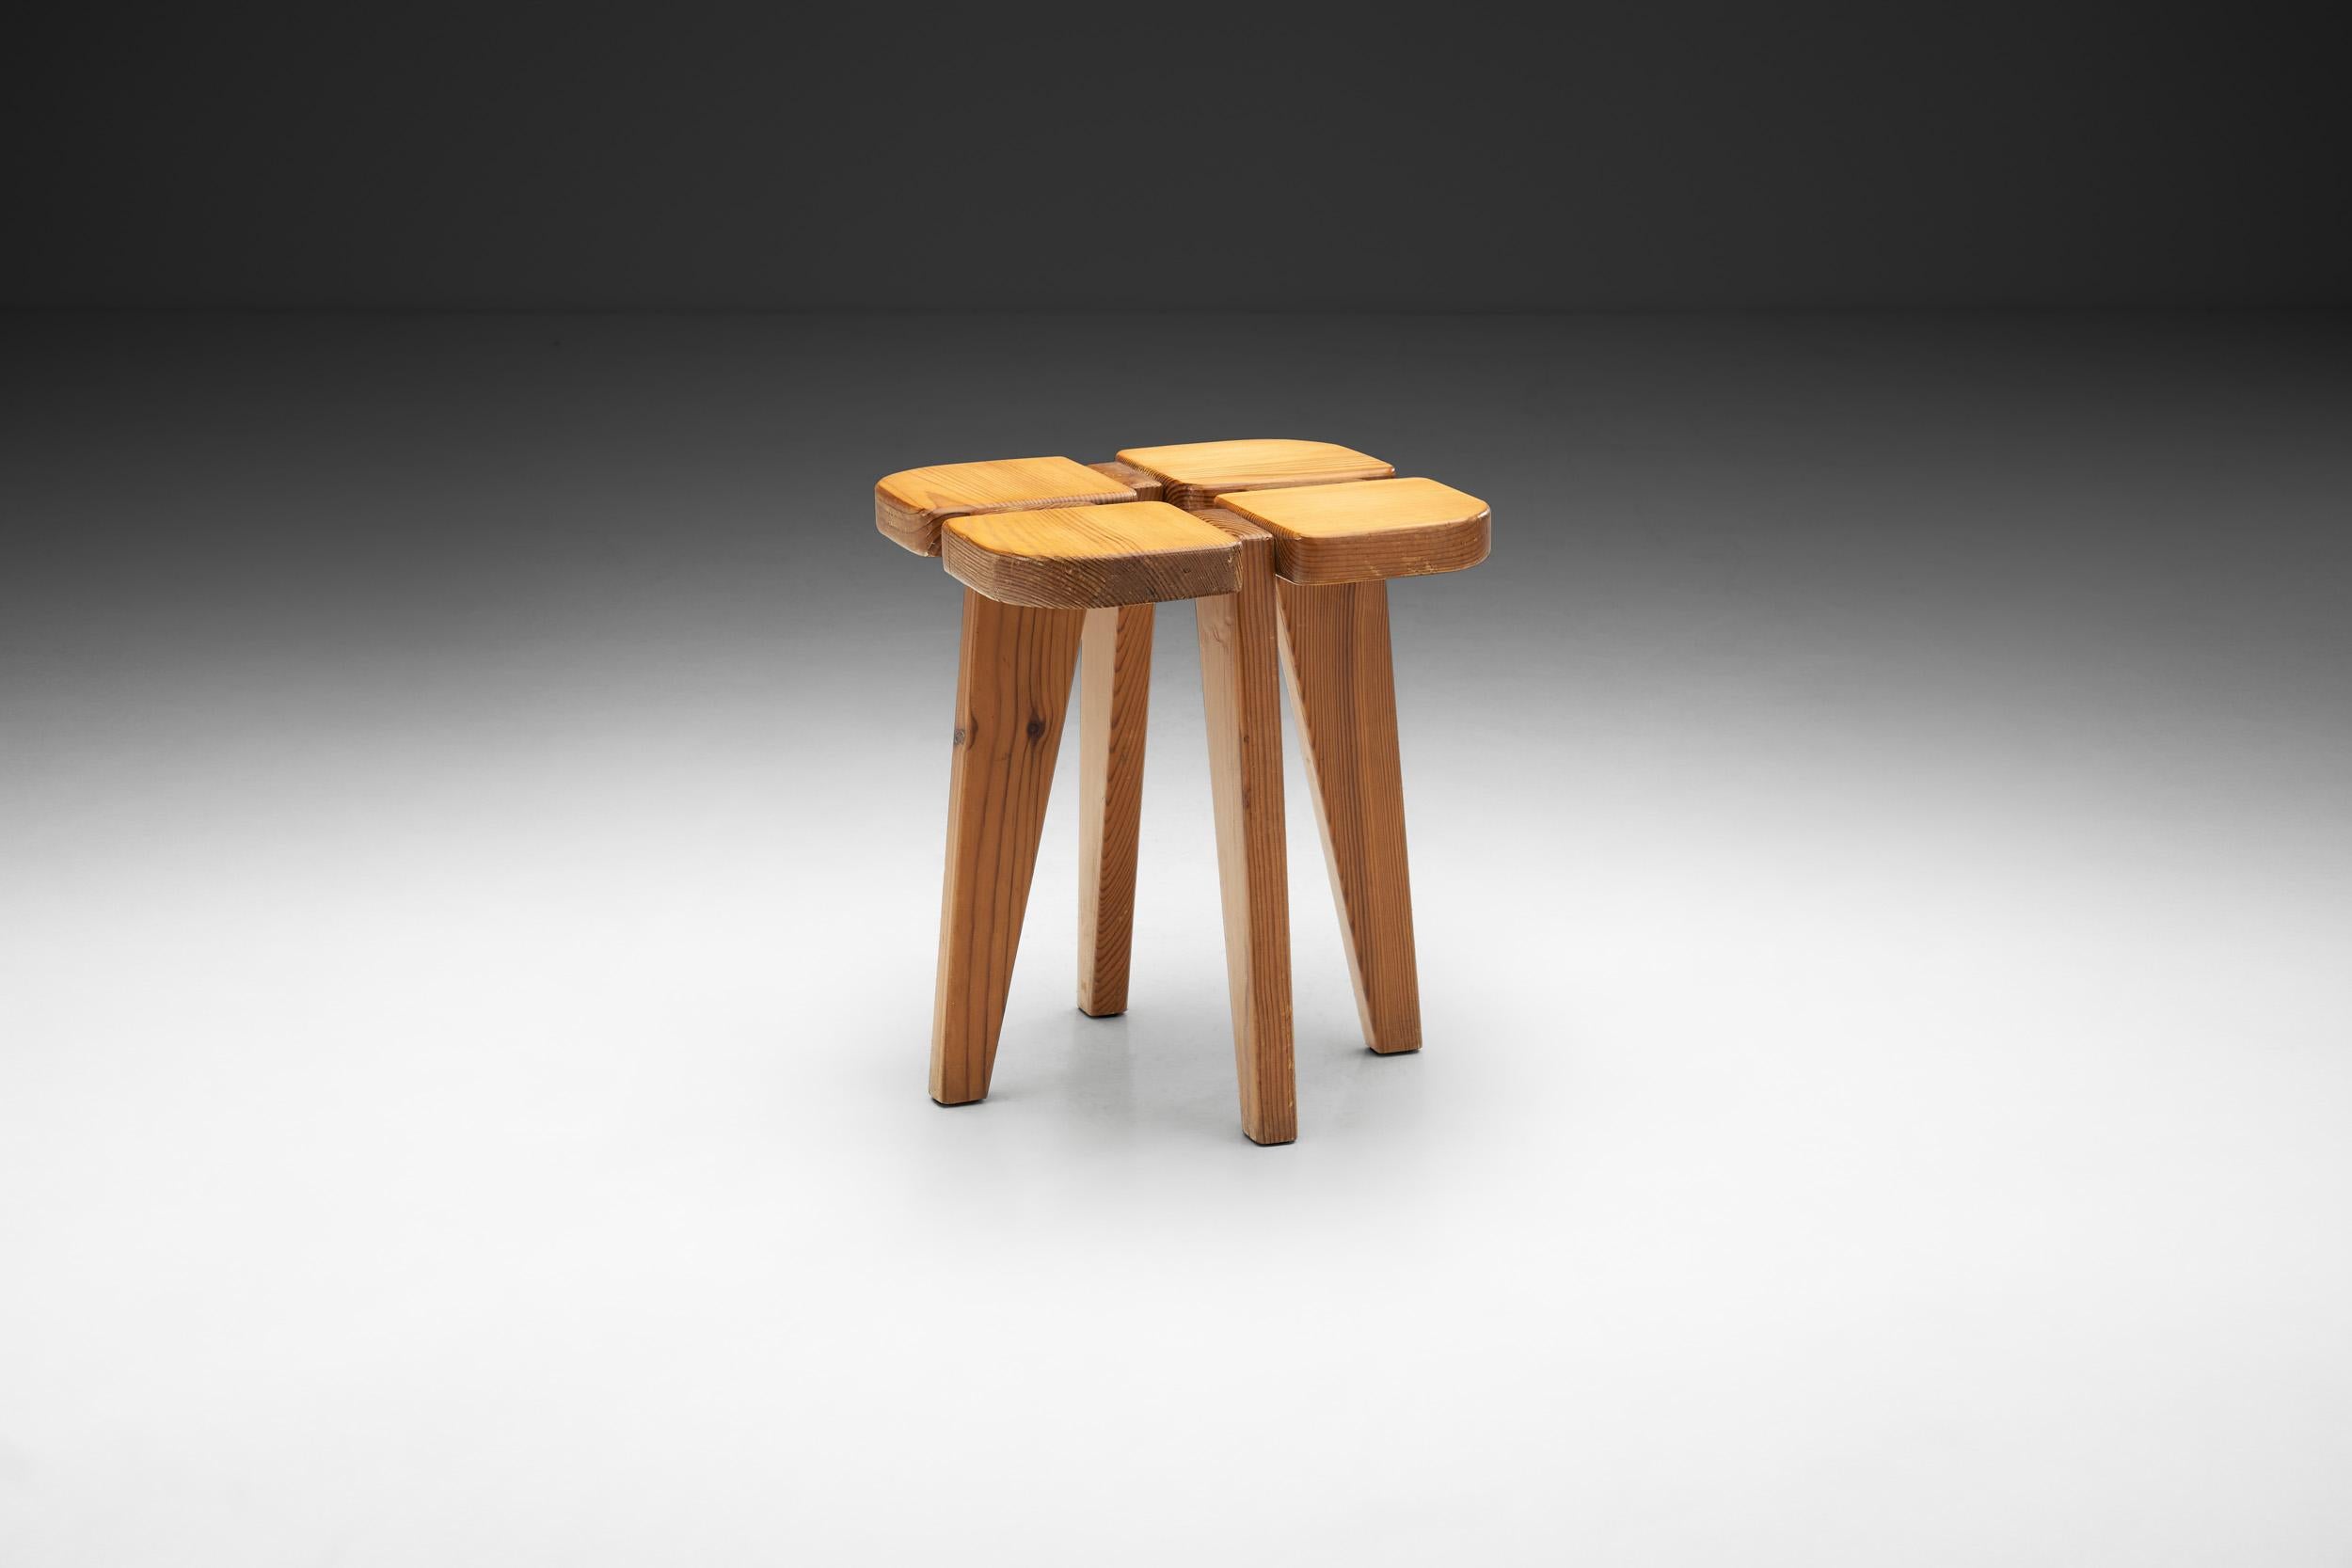 This famous pine stool by Finnish interior designer, Rauni Peippo is the most famous model from the “Apila” set that contains a table and bar stools as well. It is one of those models that is immediately recognizable thanks to its shape.

Finnish